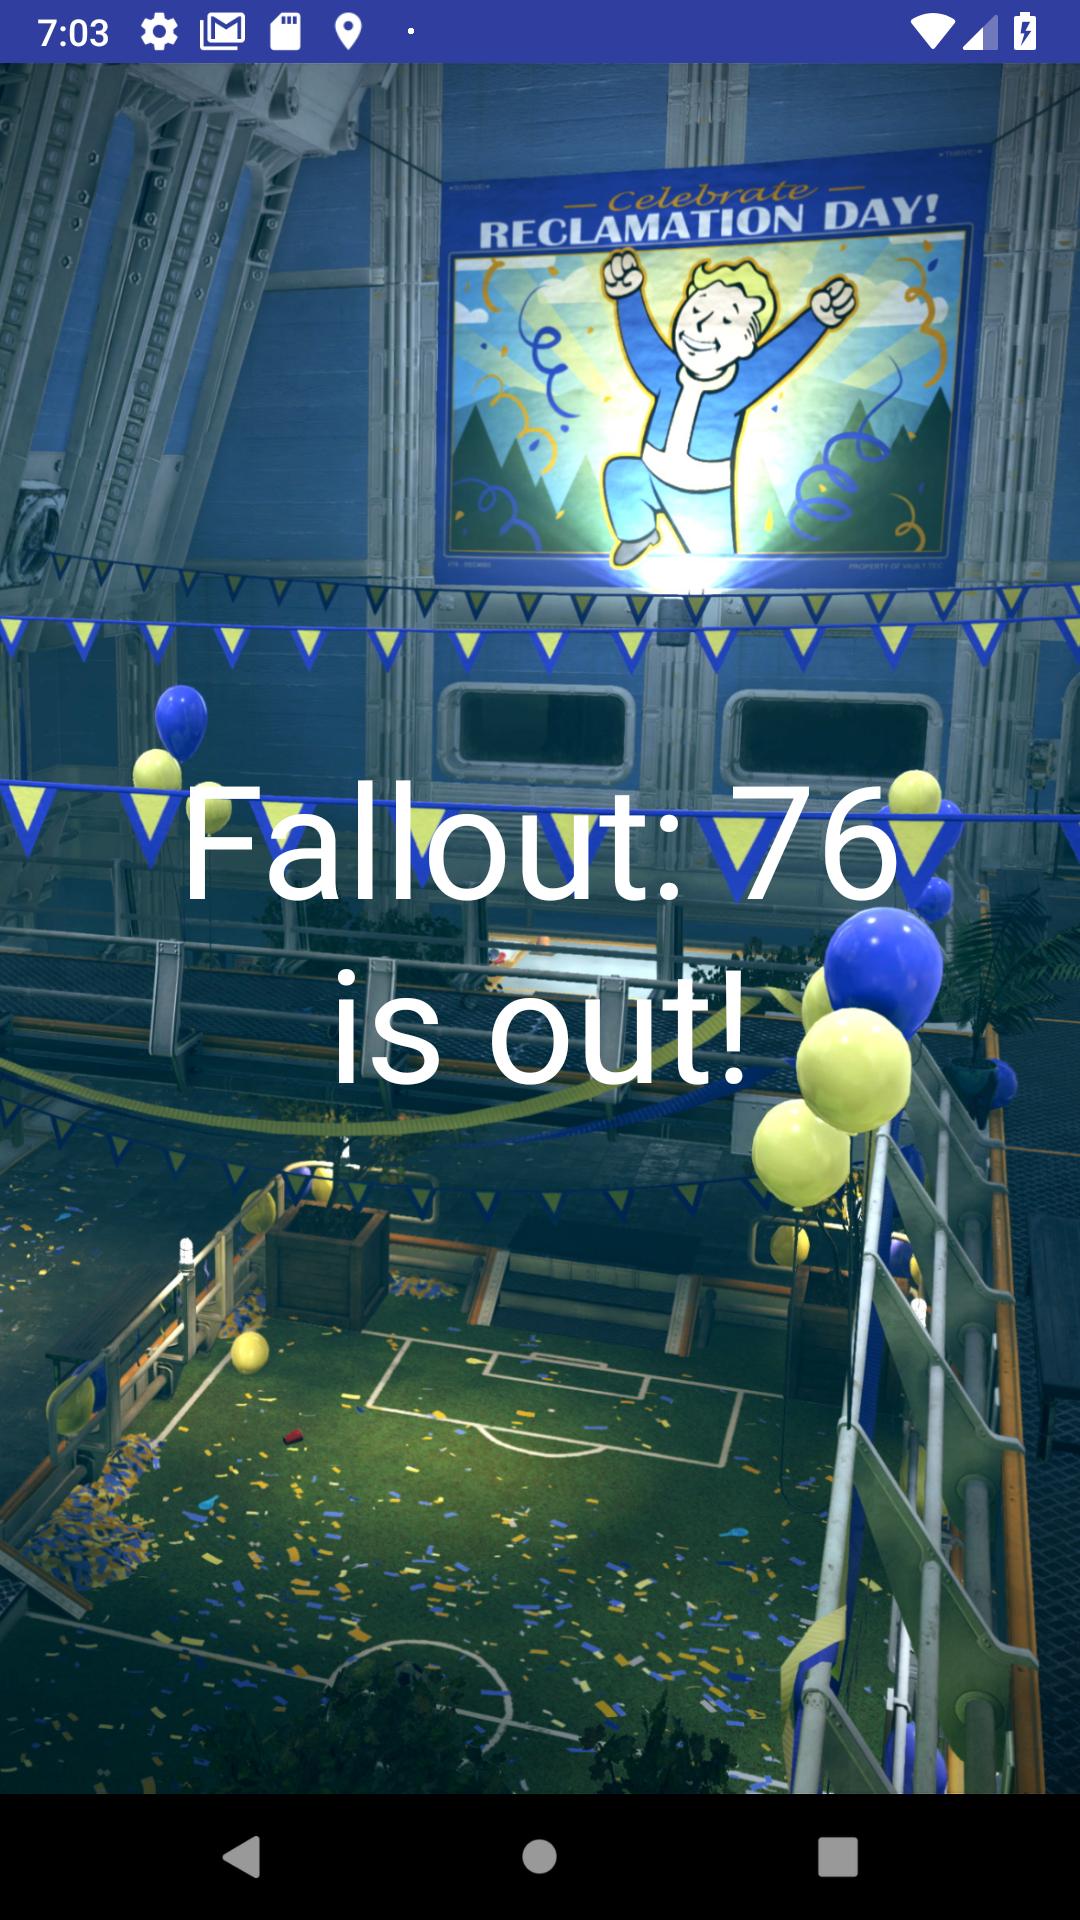 Countdown To Fallout 76 Live Wallpaper For Android Apk Download